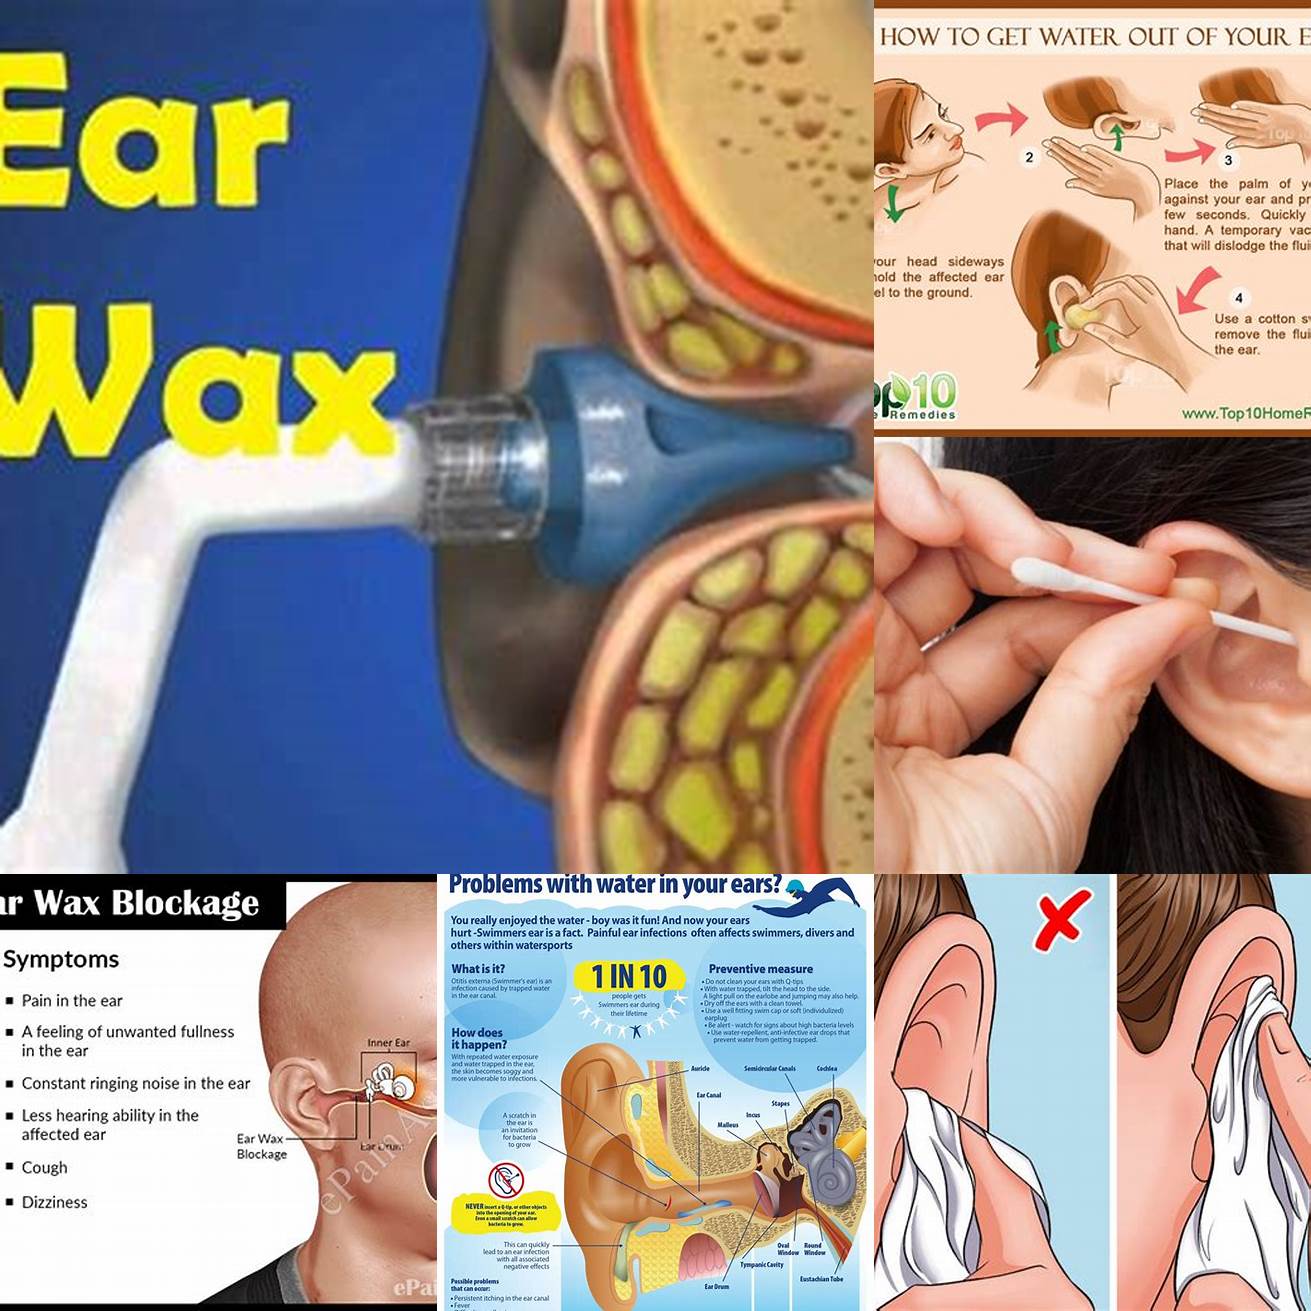 Dampen a cotton ball or soft cloth with water and gently wipe the inside of the ear flap and the entrance of the ear canal